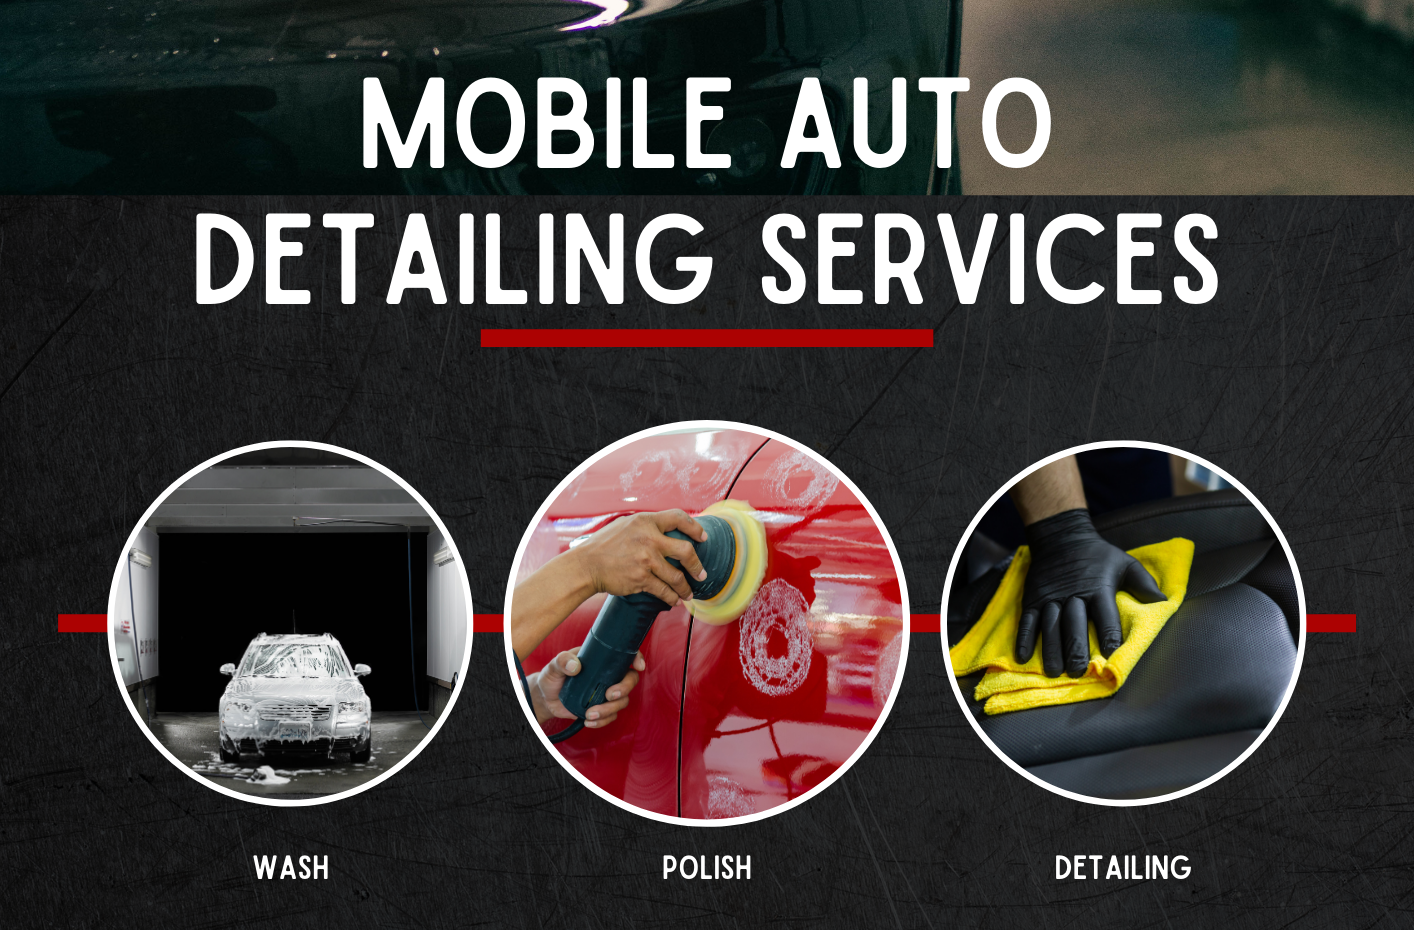 Pirate Life Mobile Auto Detailing Services